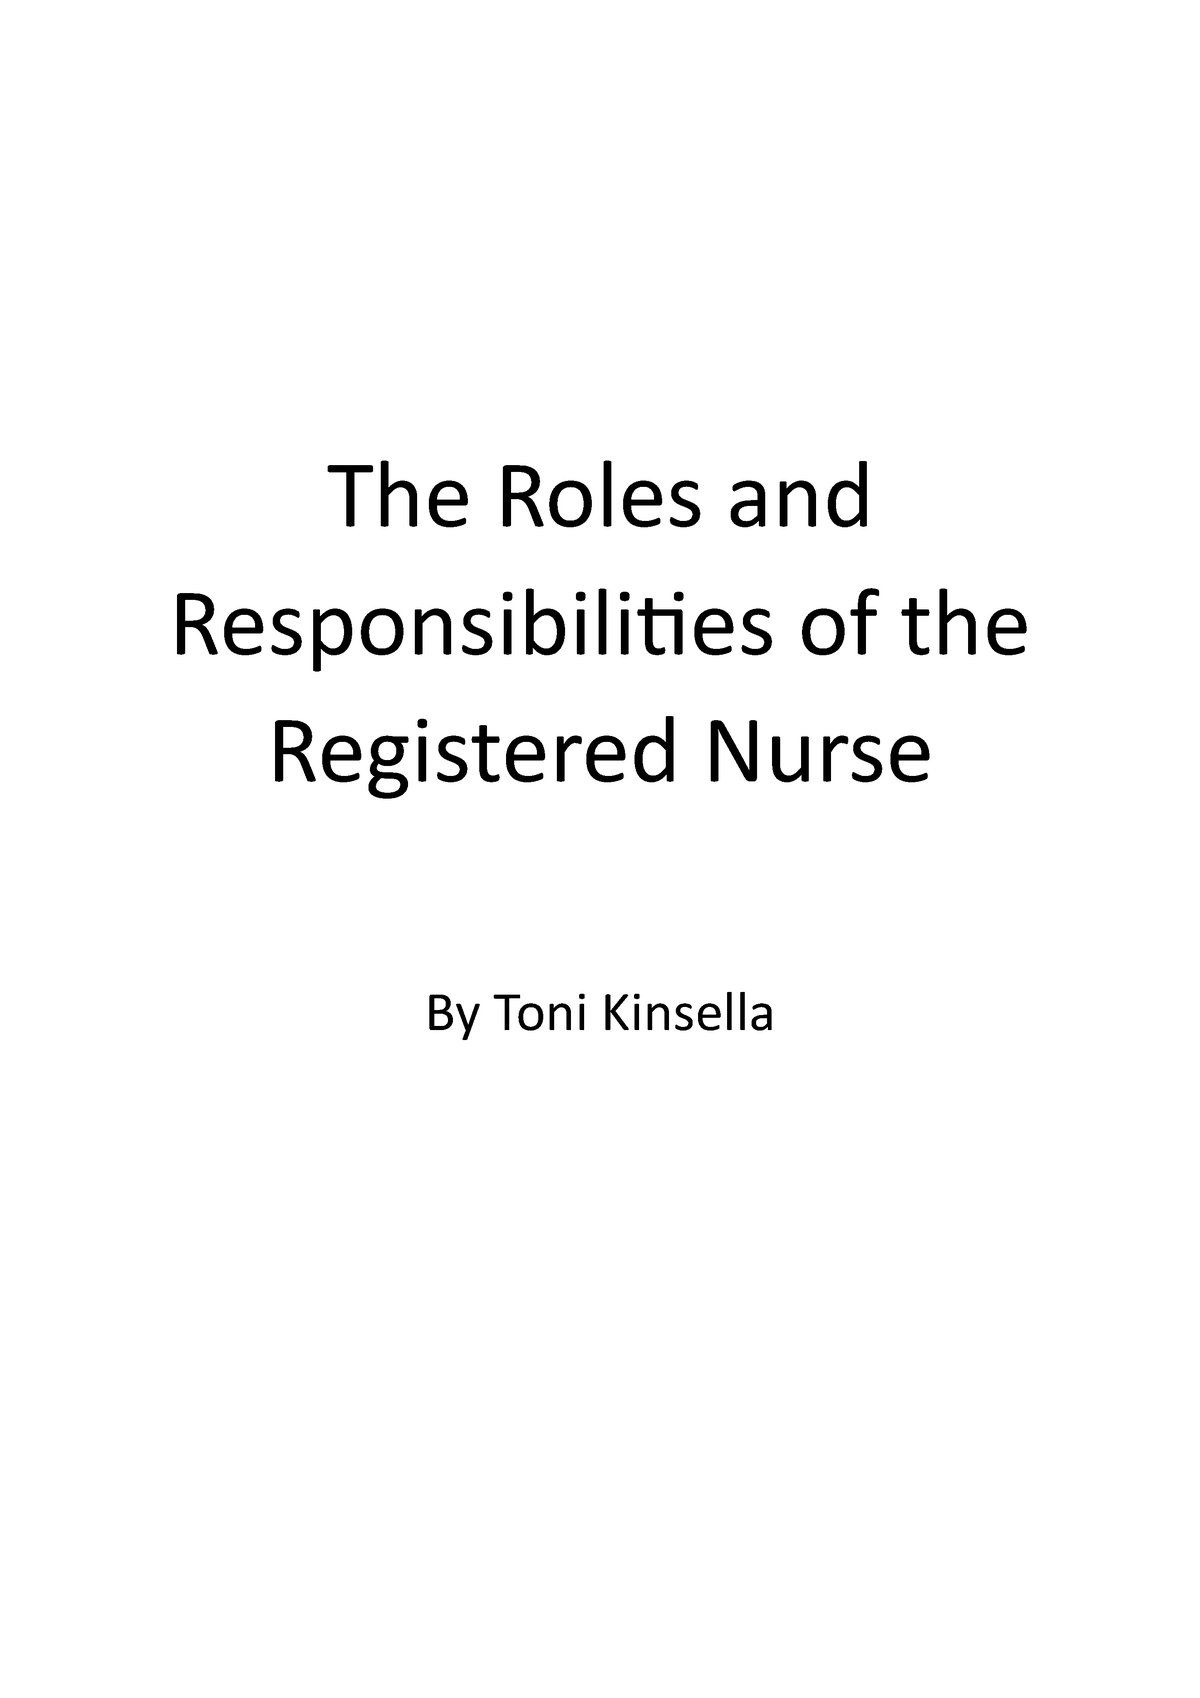 Essay For Unit 8 - The Roles And Responsibilities Of The Registered Nurse -  The Roles And - Studocu